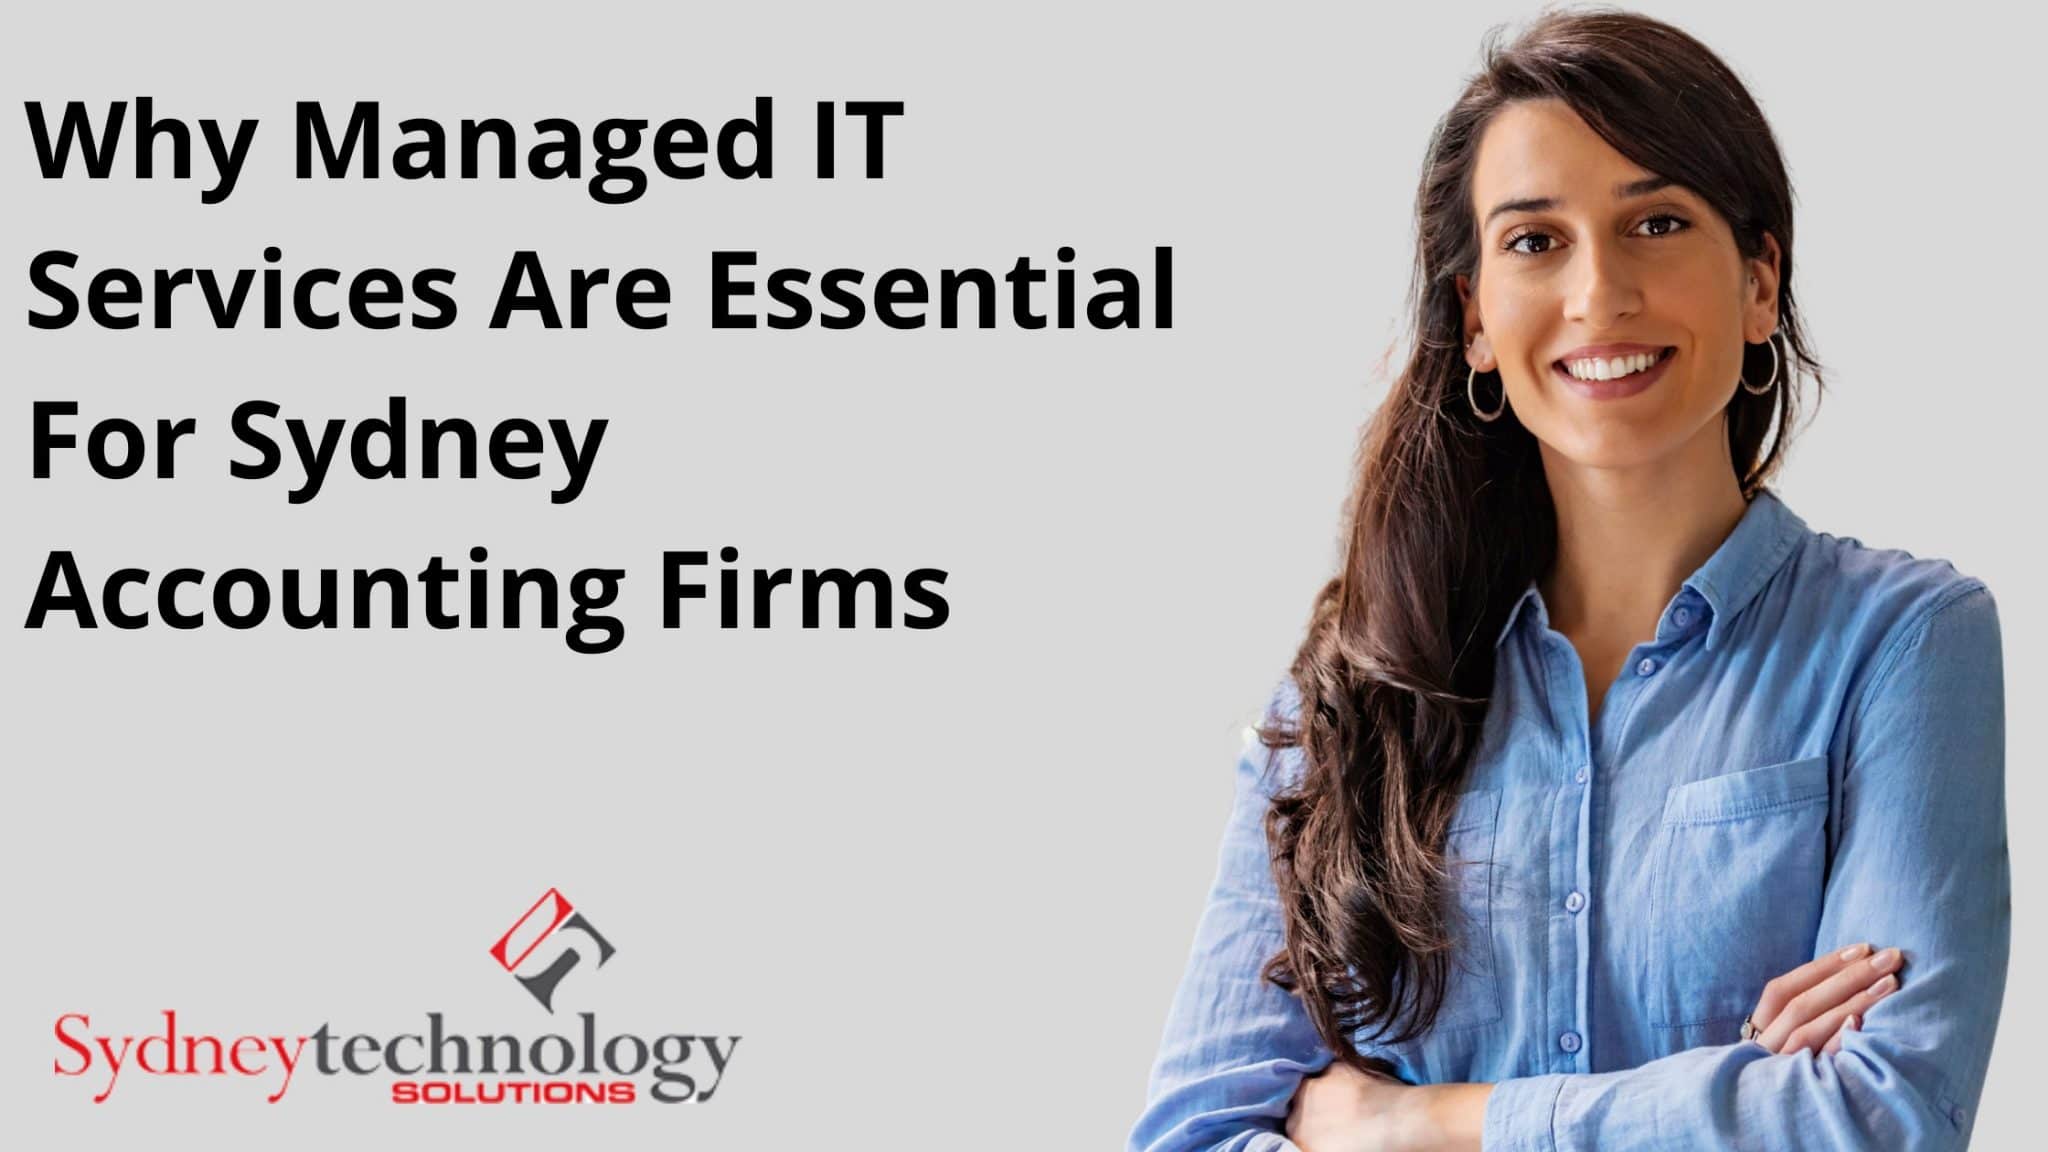 Why Managed IT Services Are Essential For Sydney Accounting Firms